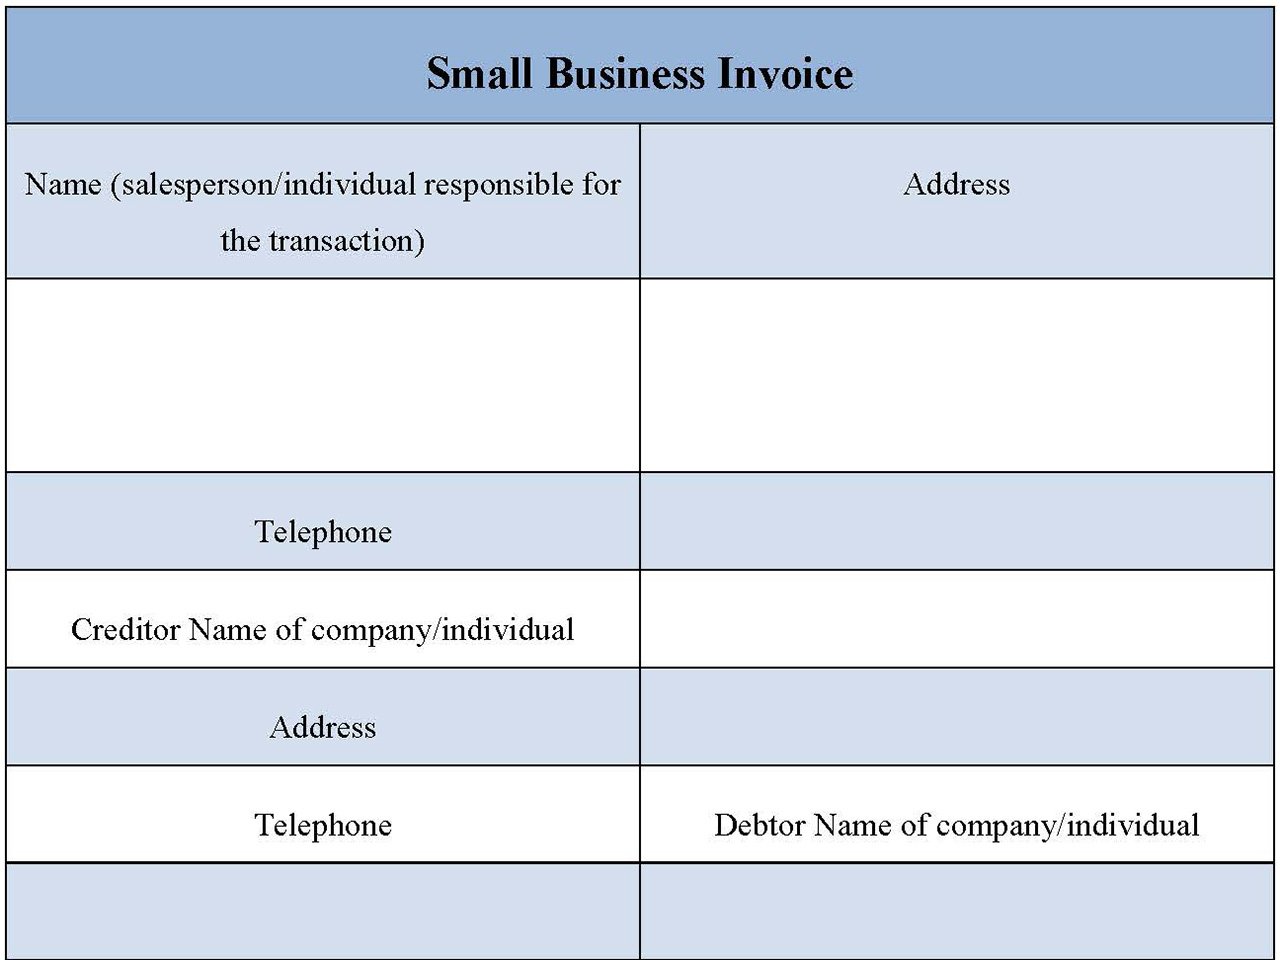 Small Business Invoice form